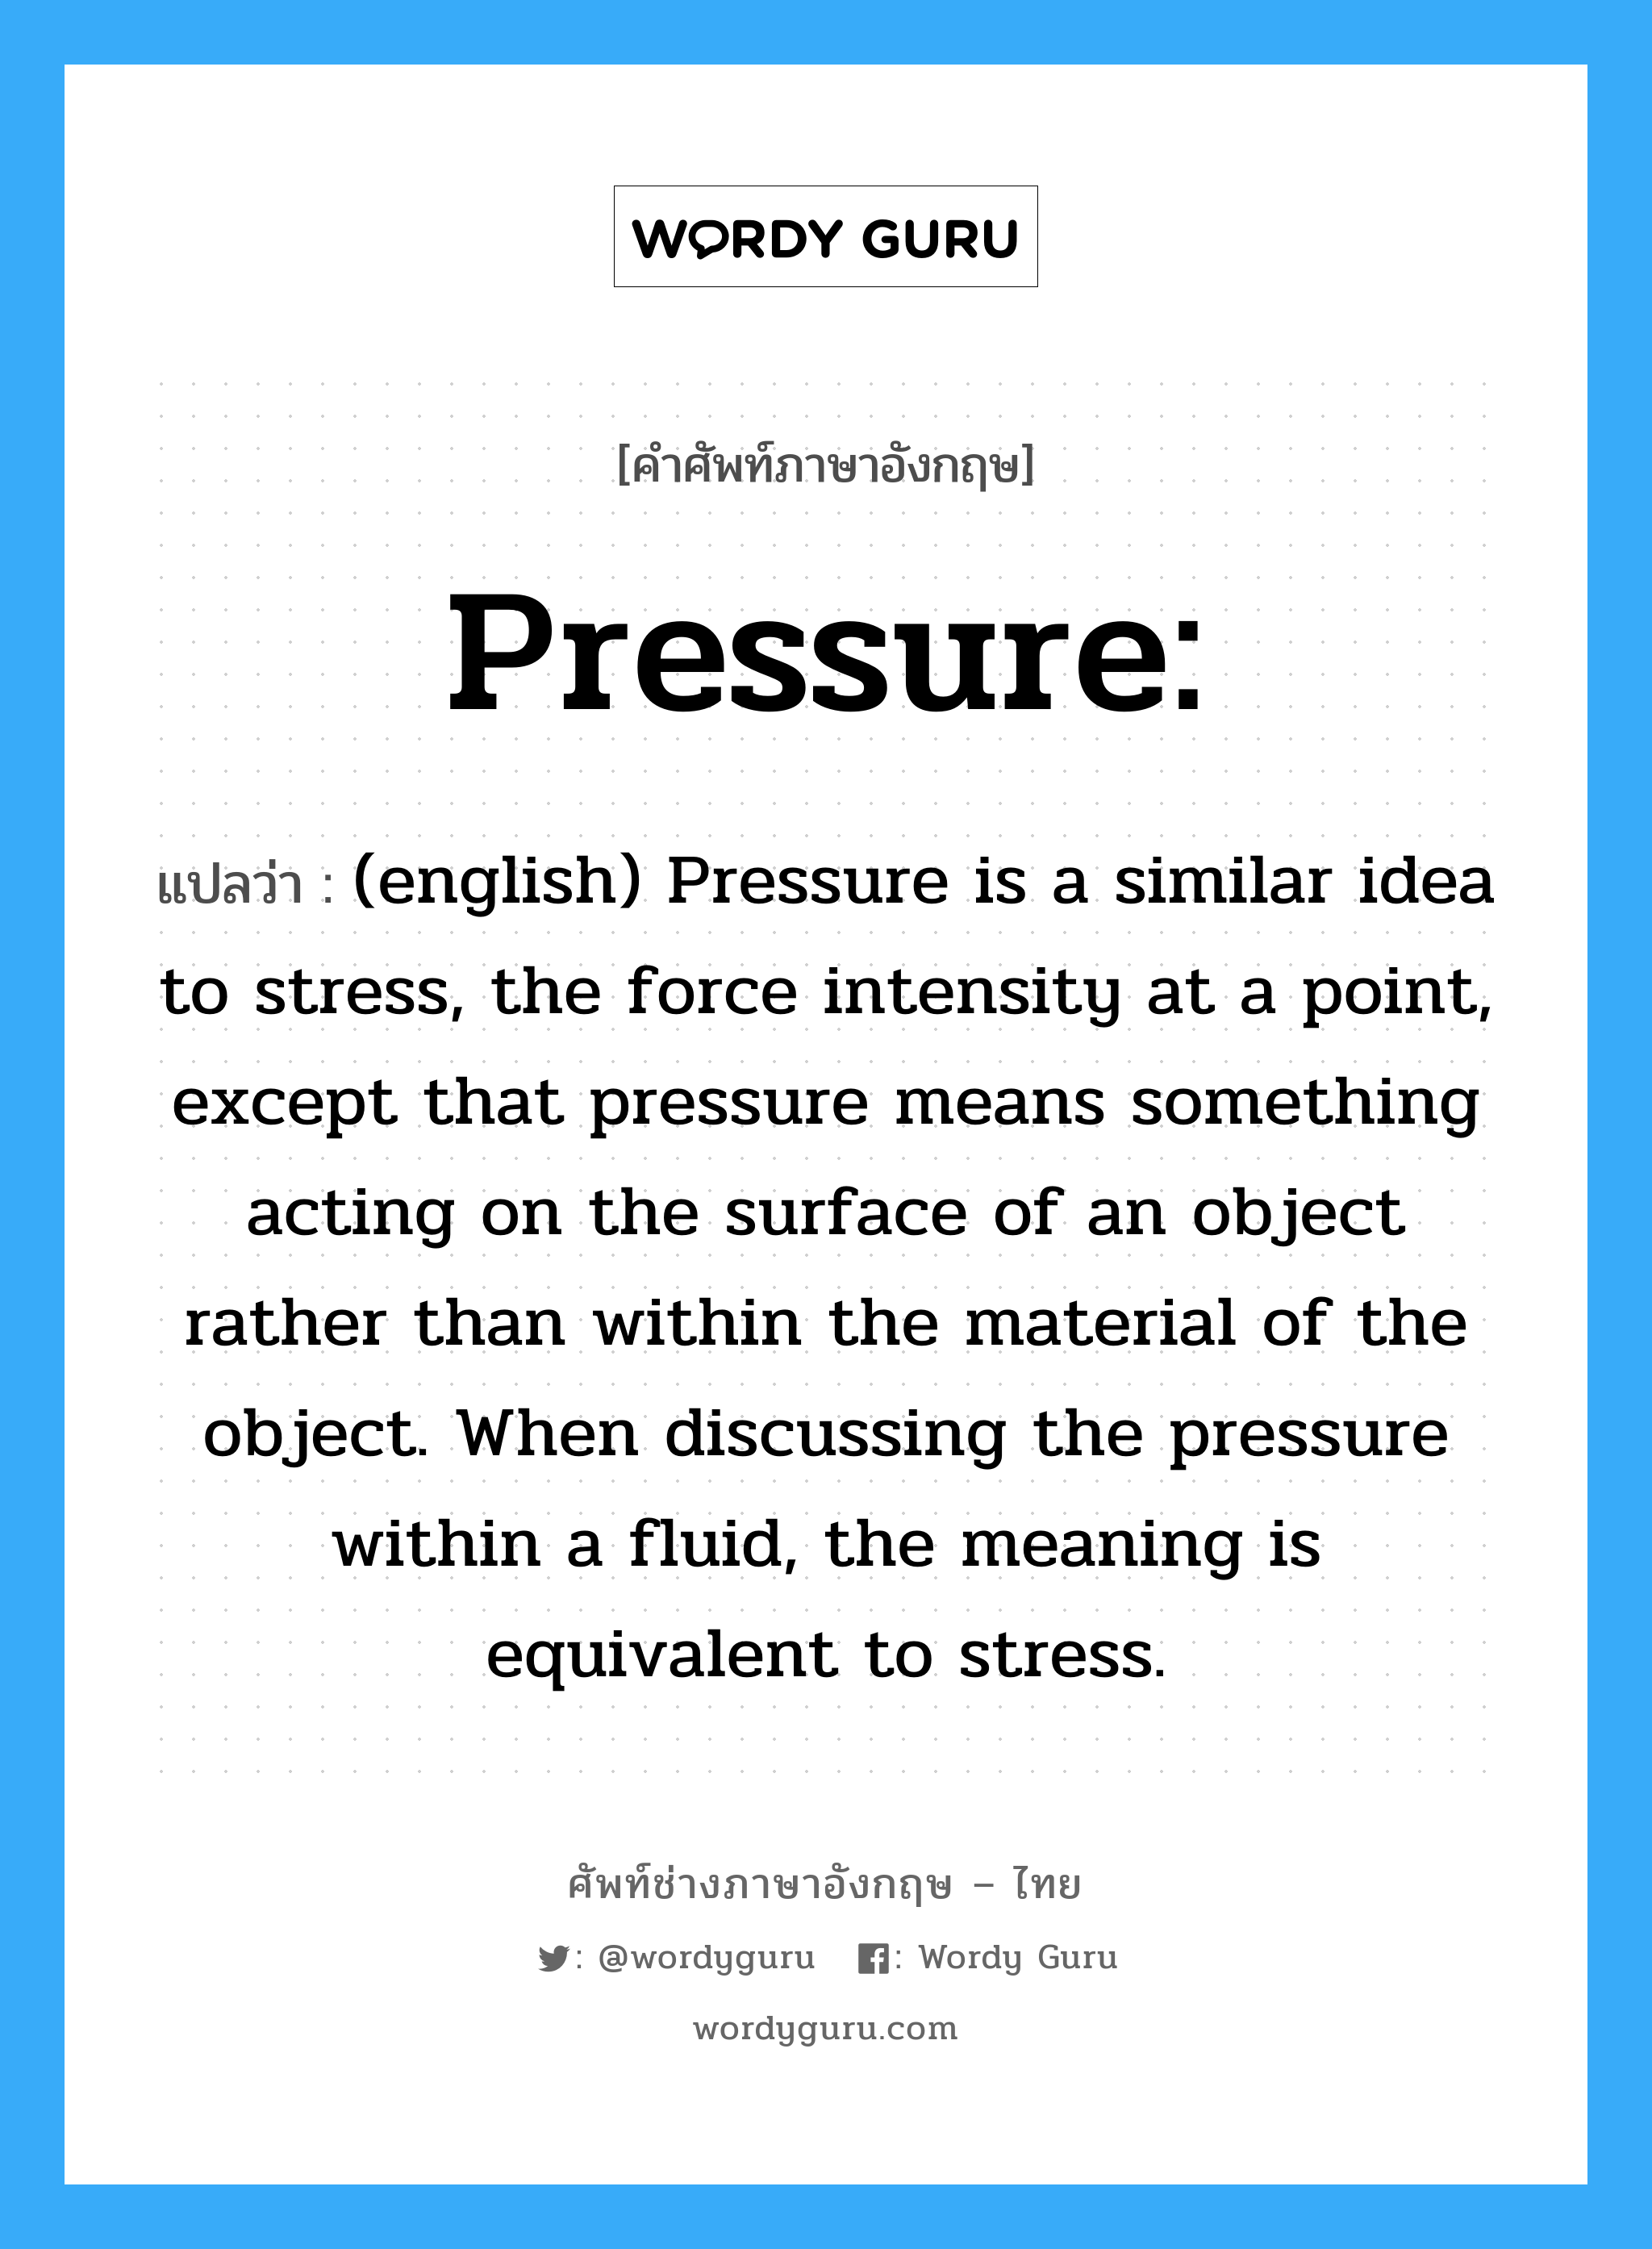 (english) Pressure is a similar idea to stress, the force intensity at a point, except that pressure means something acting on the surface of an object rather than within the material of the object. When discussing the pressure within a fluid, the meaning is equivalent to stress. ภาษาอังกฤษ?, คำศัพท์ช่างภาษาอังกฤษ - ไทย (english) Pressure is a similar idea to stress, the force intensity at a point, except that pressure means something acting on the surface of an object rather than within the material of the object. When discussing the pressure within a fluid, the meaning is equivalent to stress. คำศัพท์ภาษาอังกฤษ (english) Pressure is a similar idea to stress, the force intensity at a point, except that pressure means something acting on the surface of an object rather than within the material of the object. When discussing the pressure within a fluid, the meaning is equivalent to stress. แปลว่า Pressure: